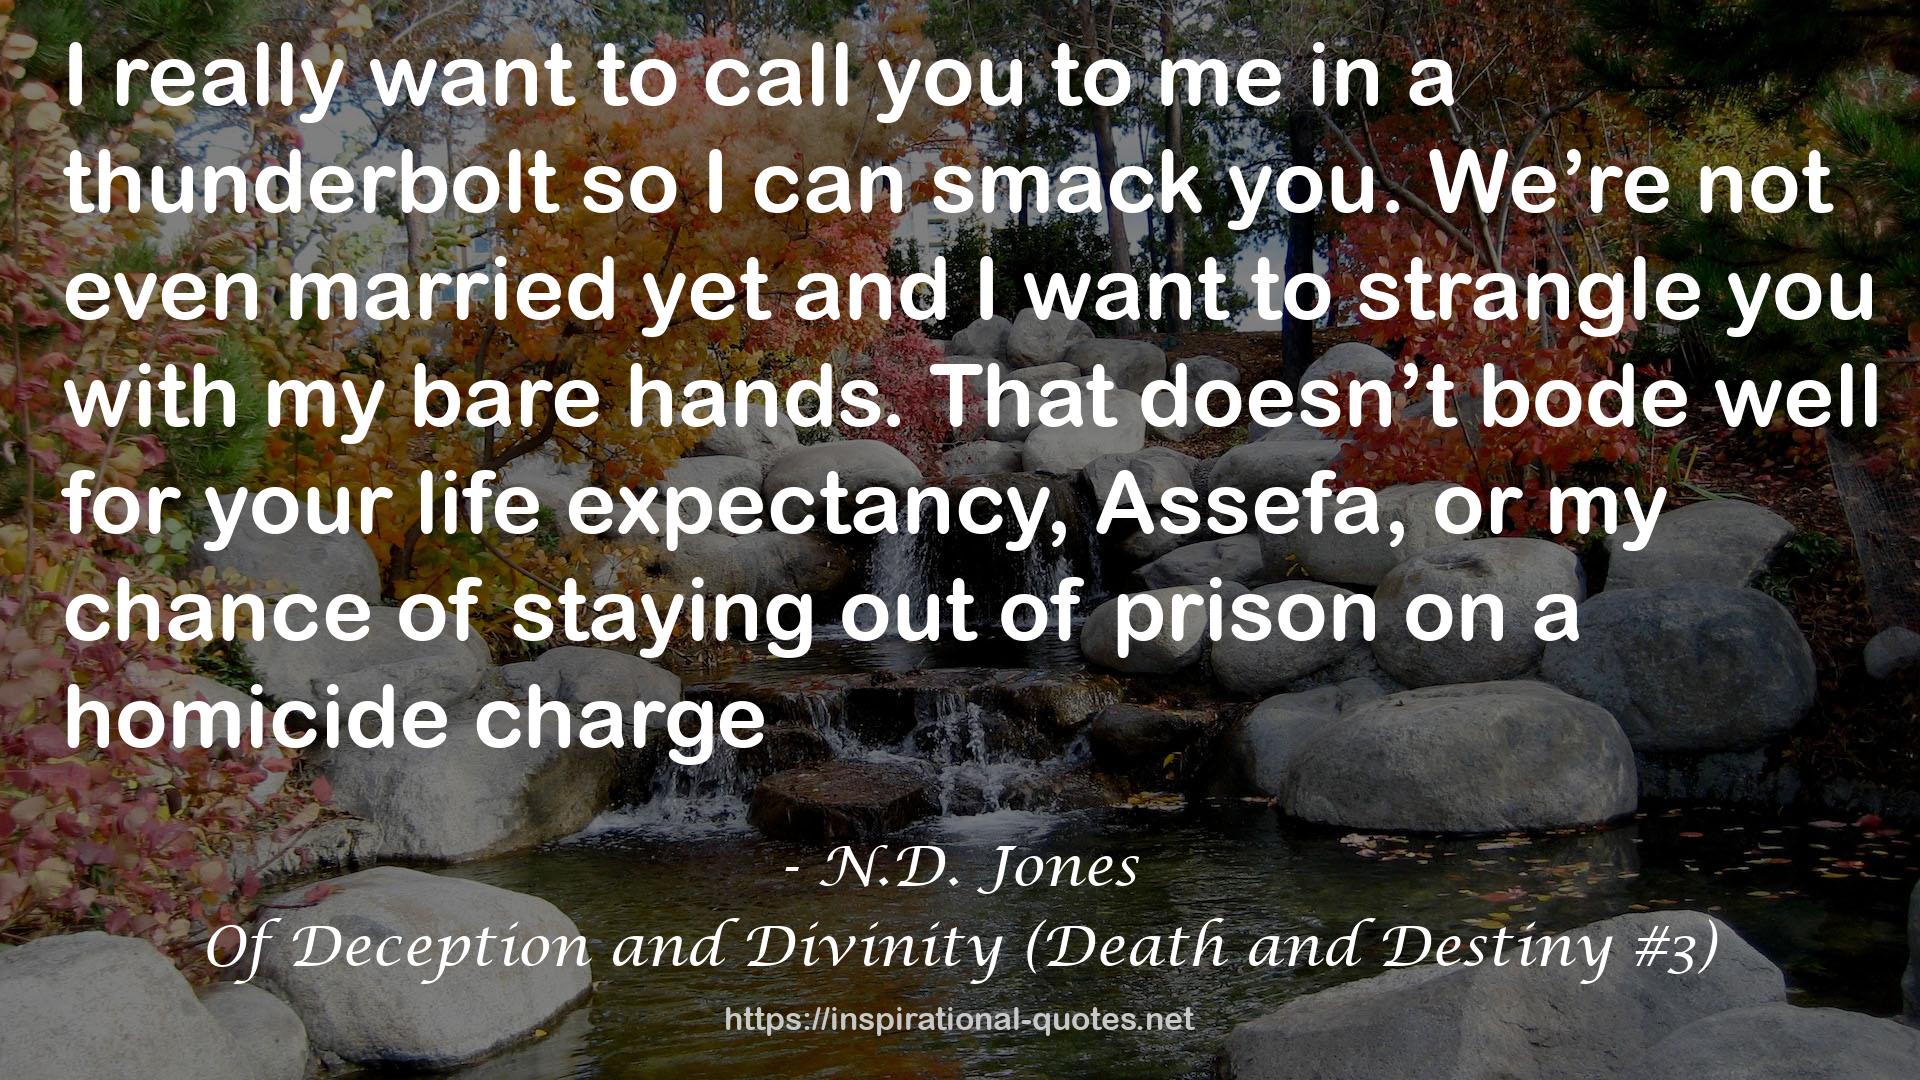 Of Deception and Divinity (Death and Destiny #3) QUOTES